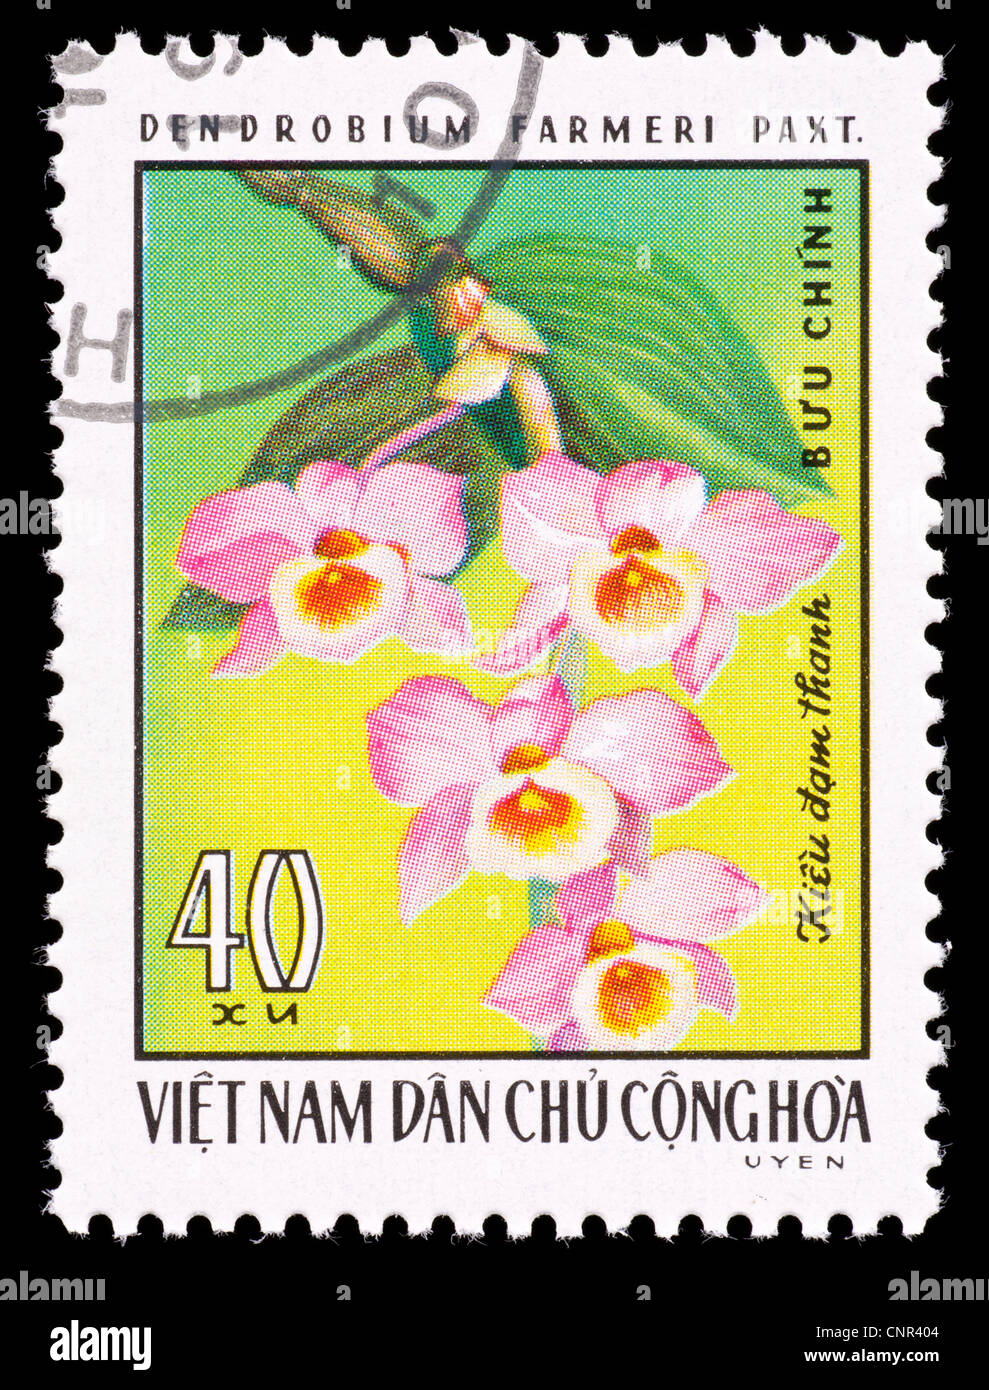 Postage stamp from Vietnam depicting a tropical Farmer's Dendrobium